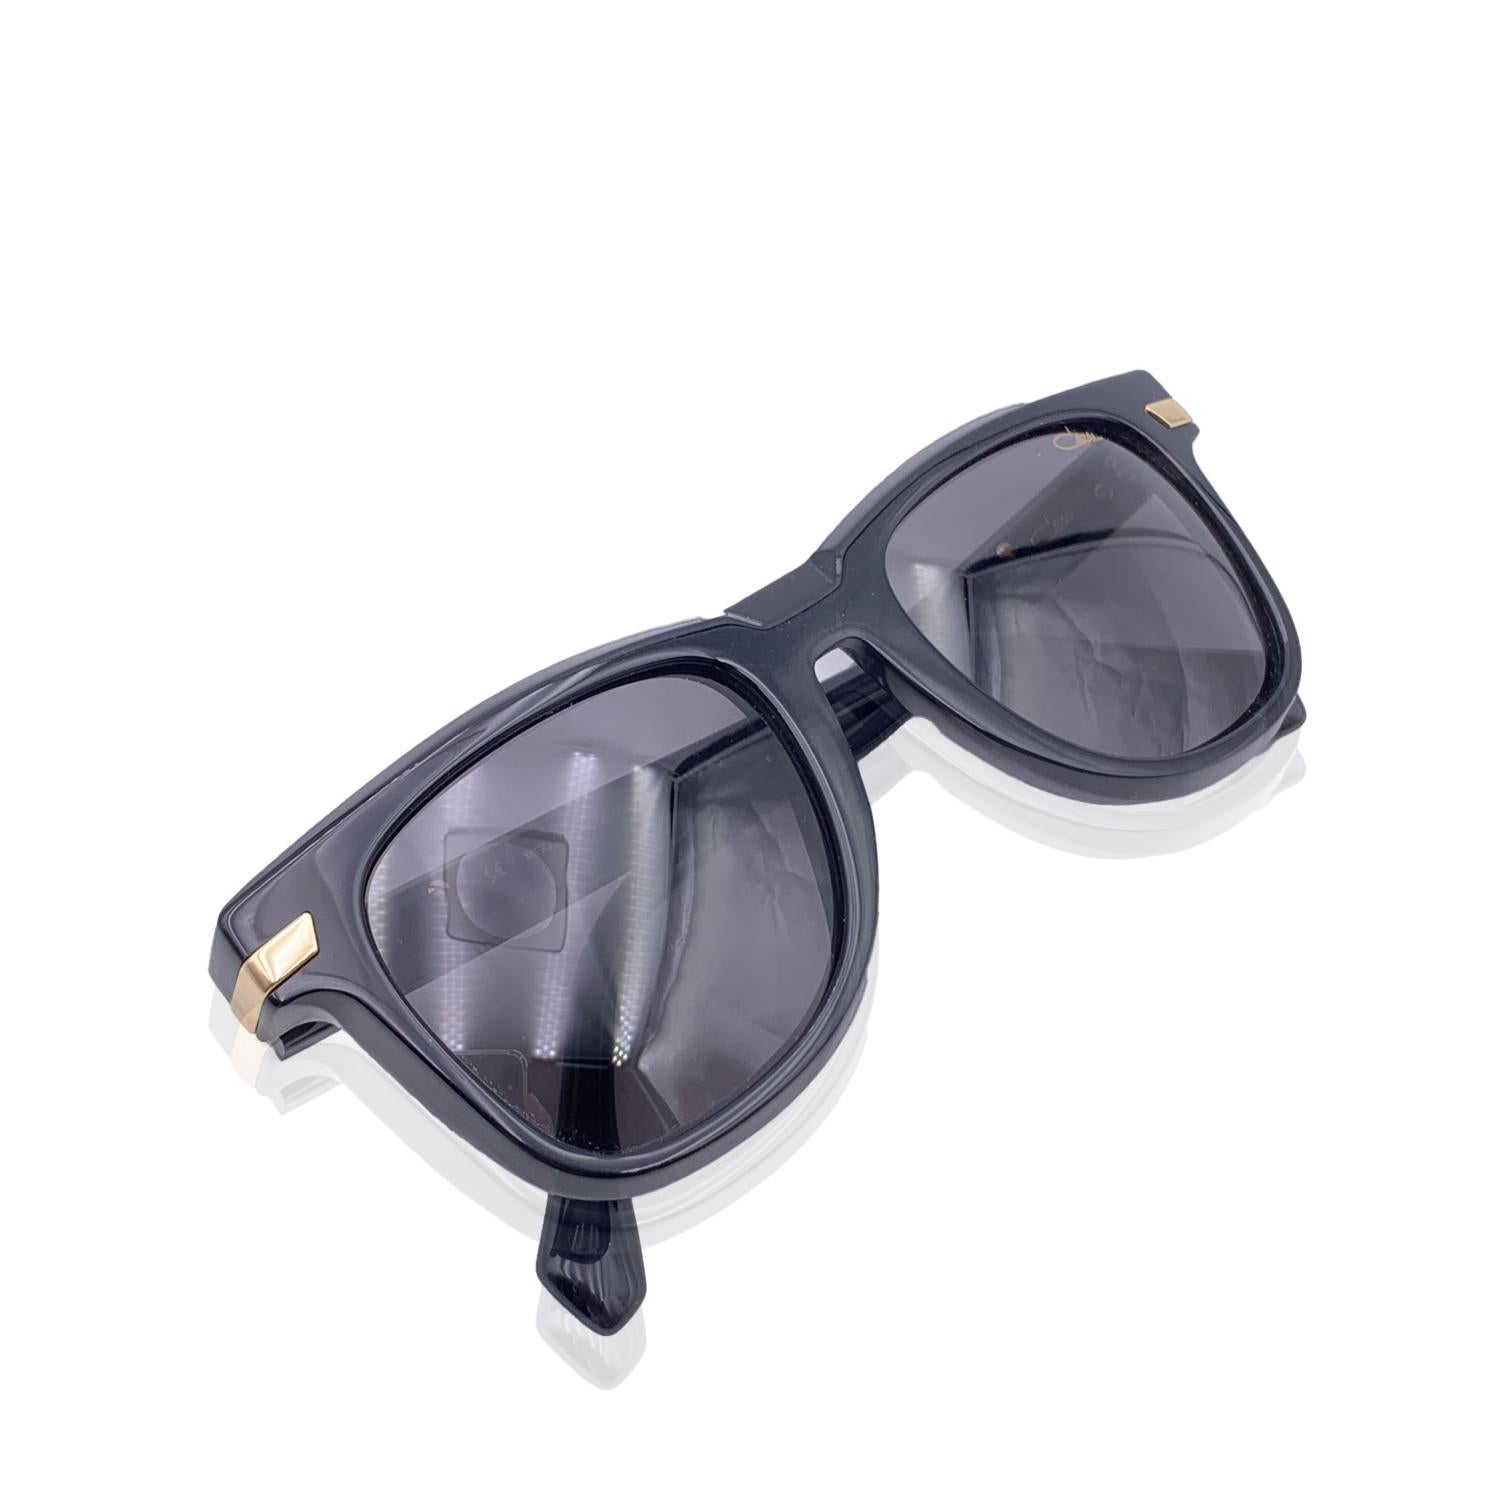 Beautiful sunglasses by Cazal, mod.8041, Col 001. Black acetate frame with gold metal accents on temples. Cazal logo on temples. Grey 100% UV protection lenses. Cazal signature on left lens. Made in Germany.

Details

MATERIAL: Acetate

COLOR: